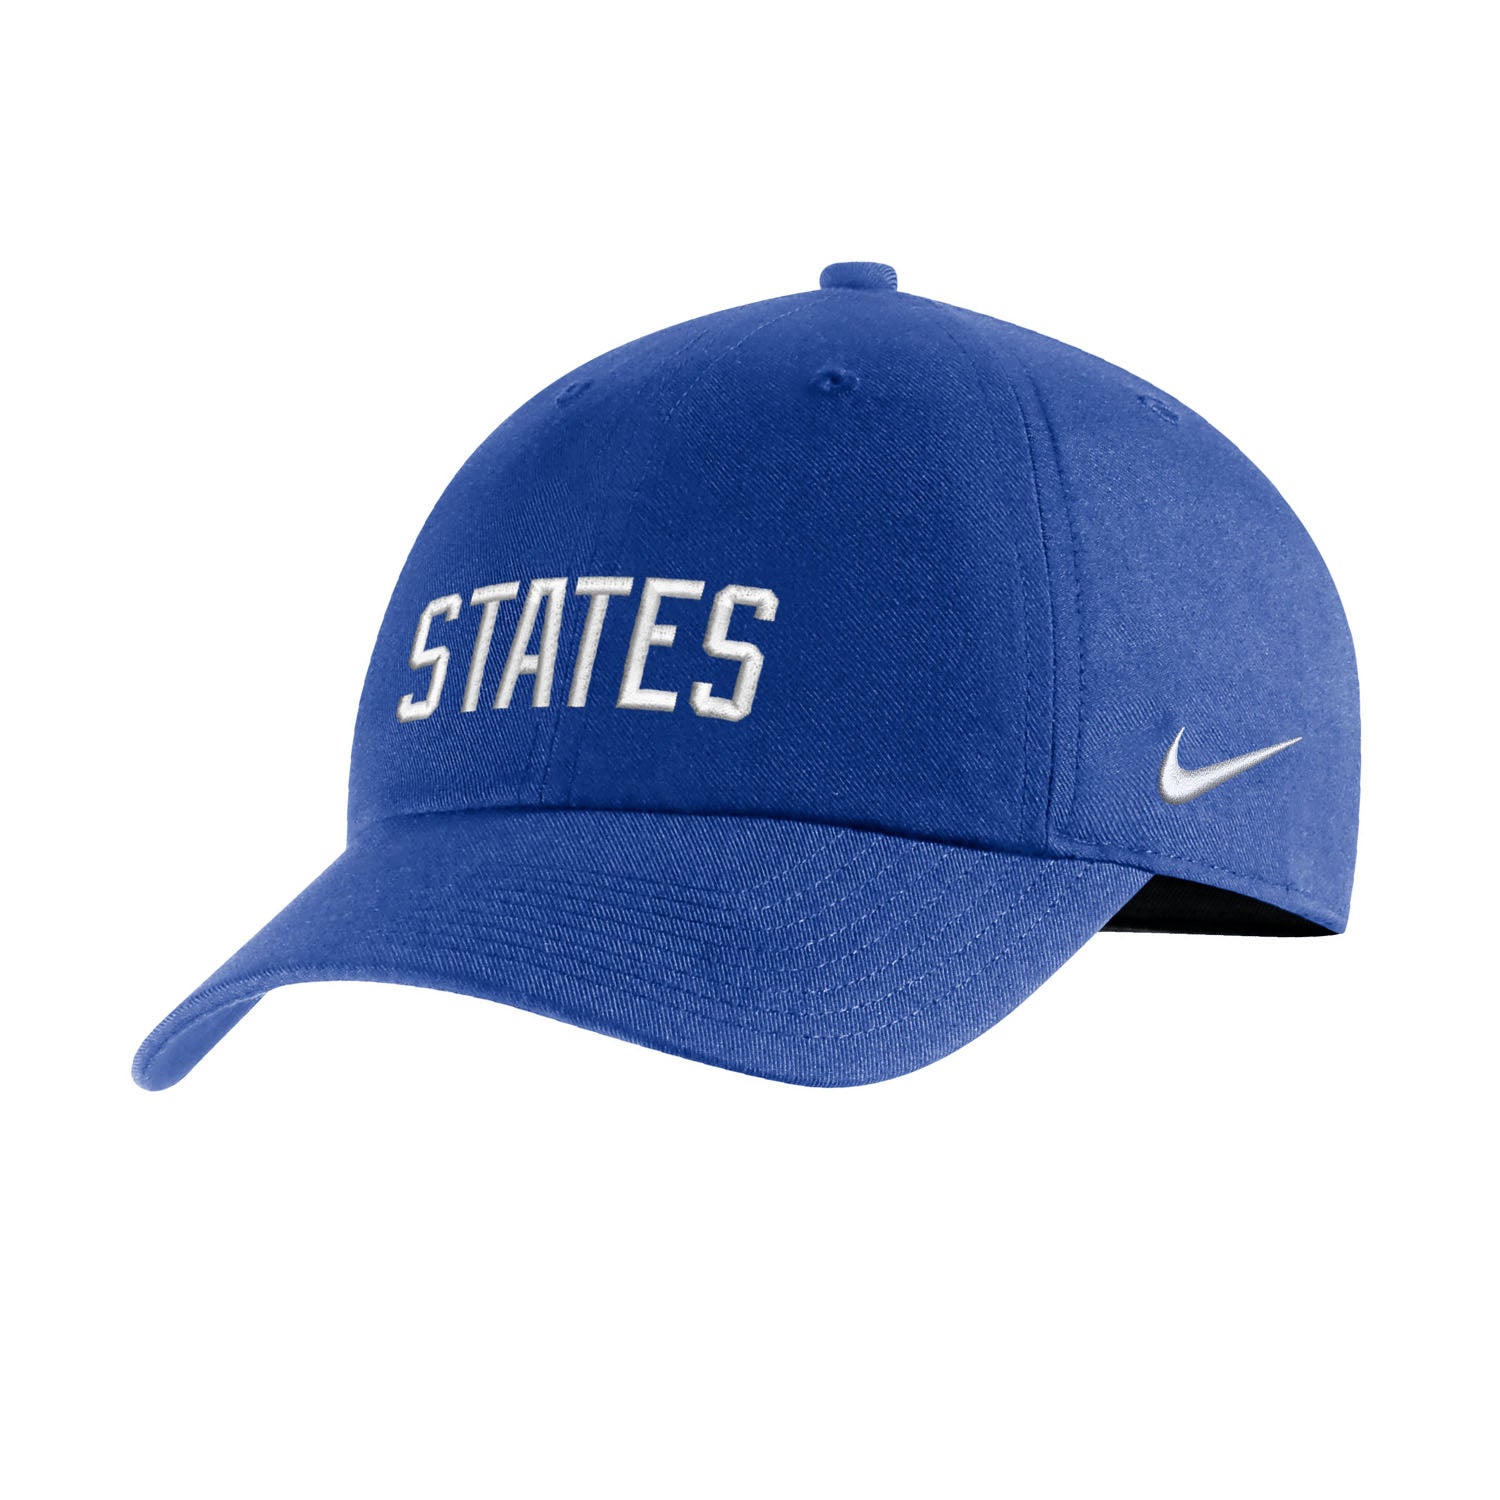 Men's Nike USA Campus Royal Hat - Official U.S. Soccer Store